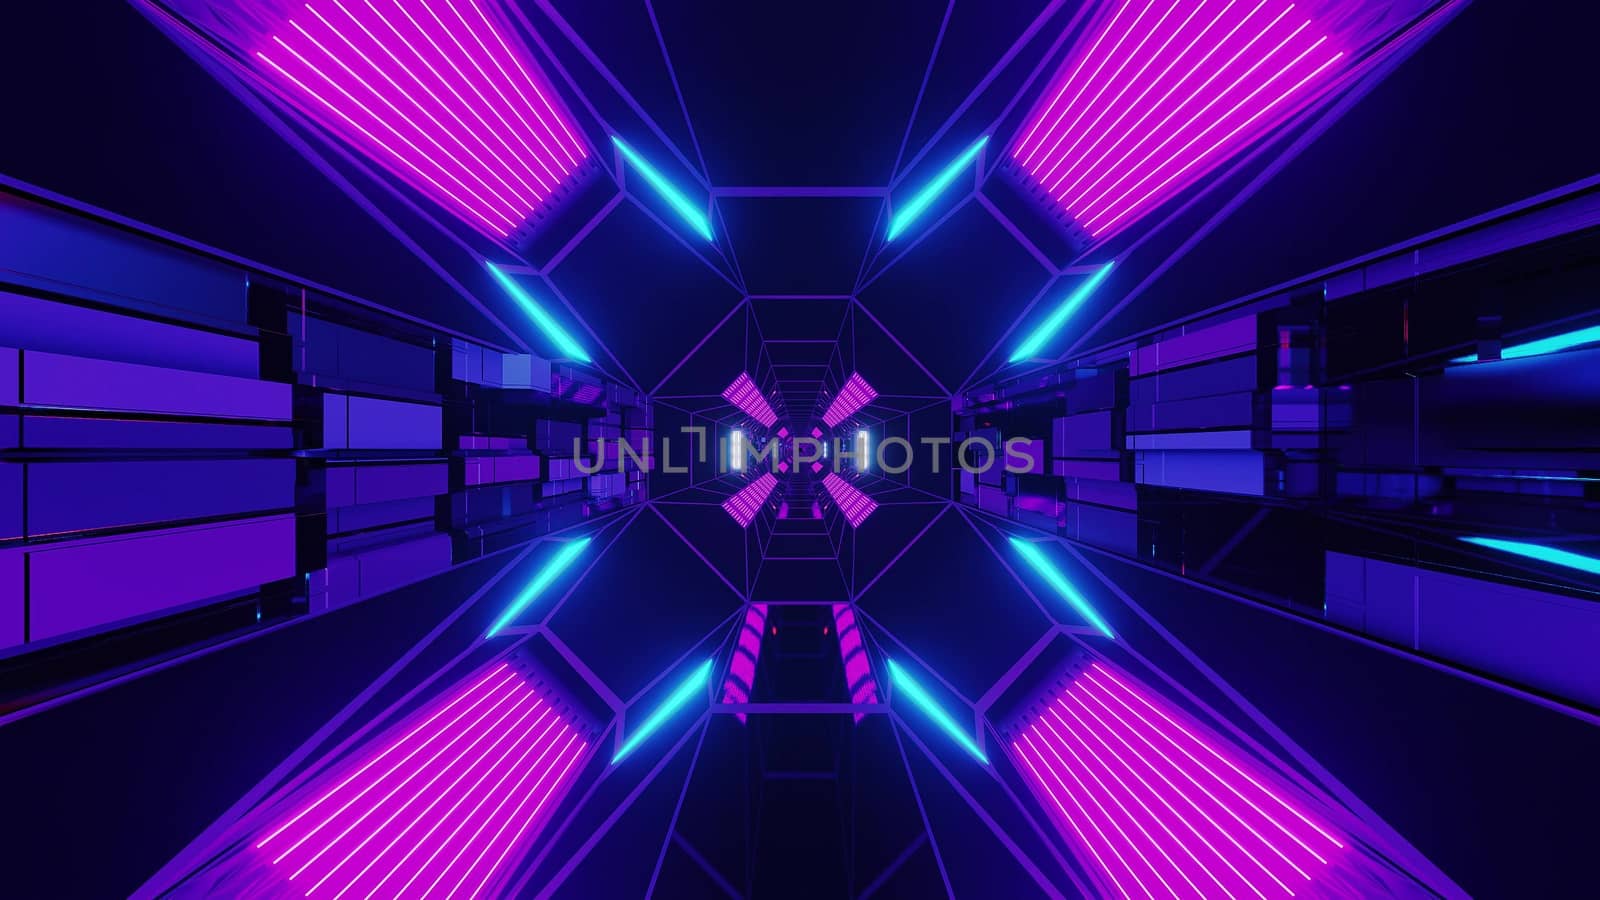 creative endless futurisic sci-fi tunnel corridor with technical texture 3d illustration wallpaper background graphic artwork by tunnelmotions